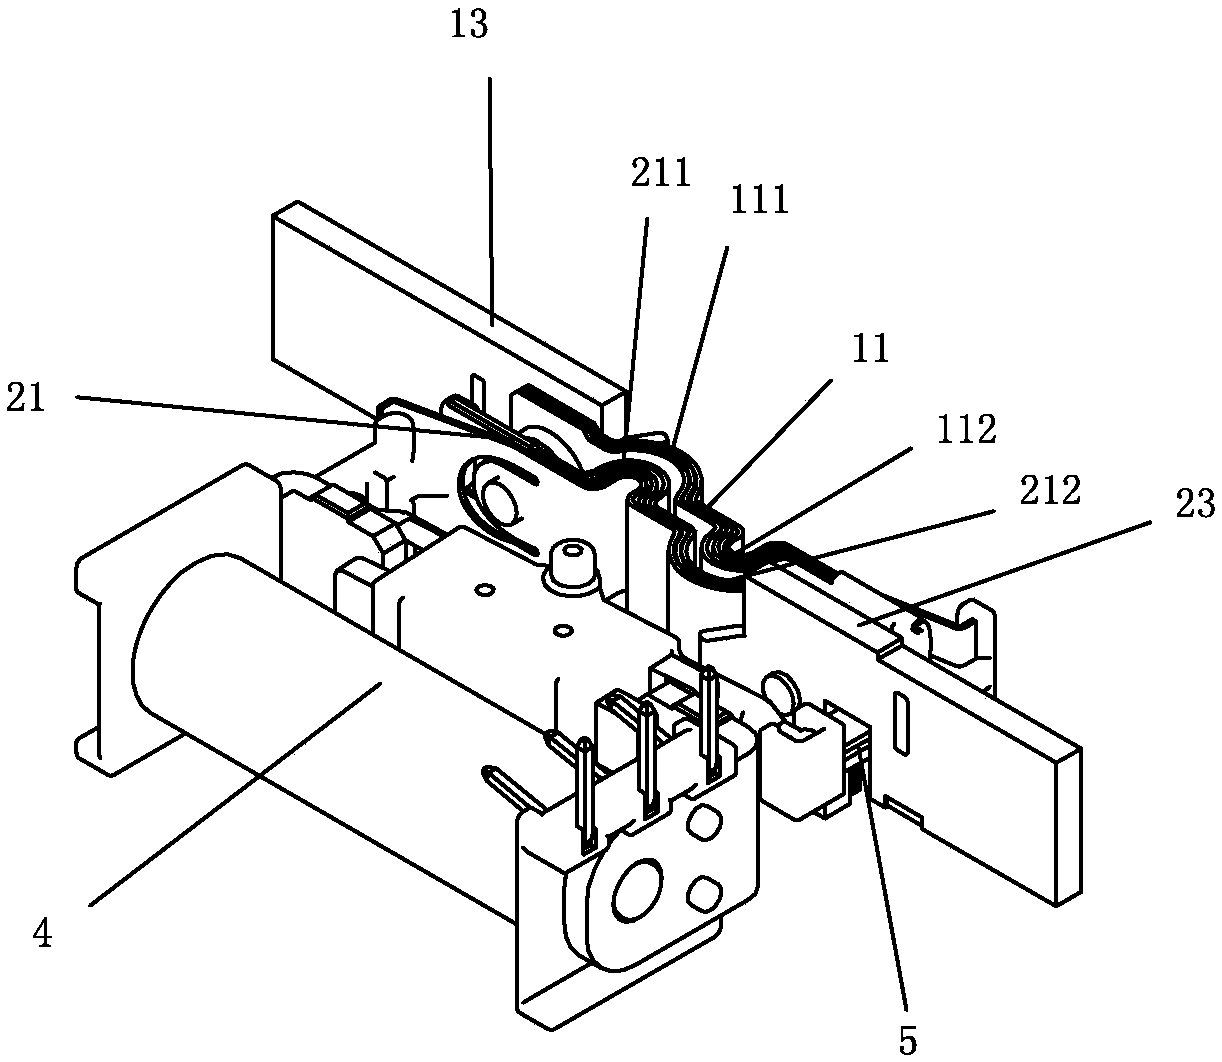 A Magnetic Latching Relay Capable of Resisting Short Circuit Current